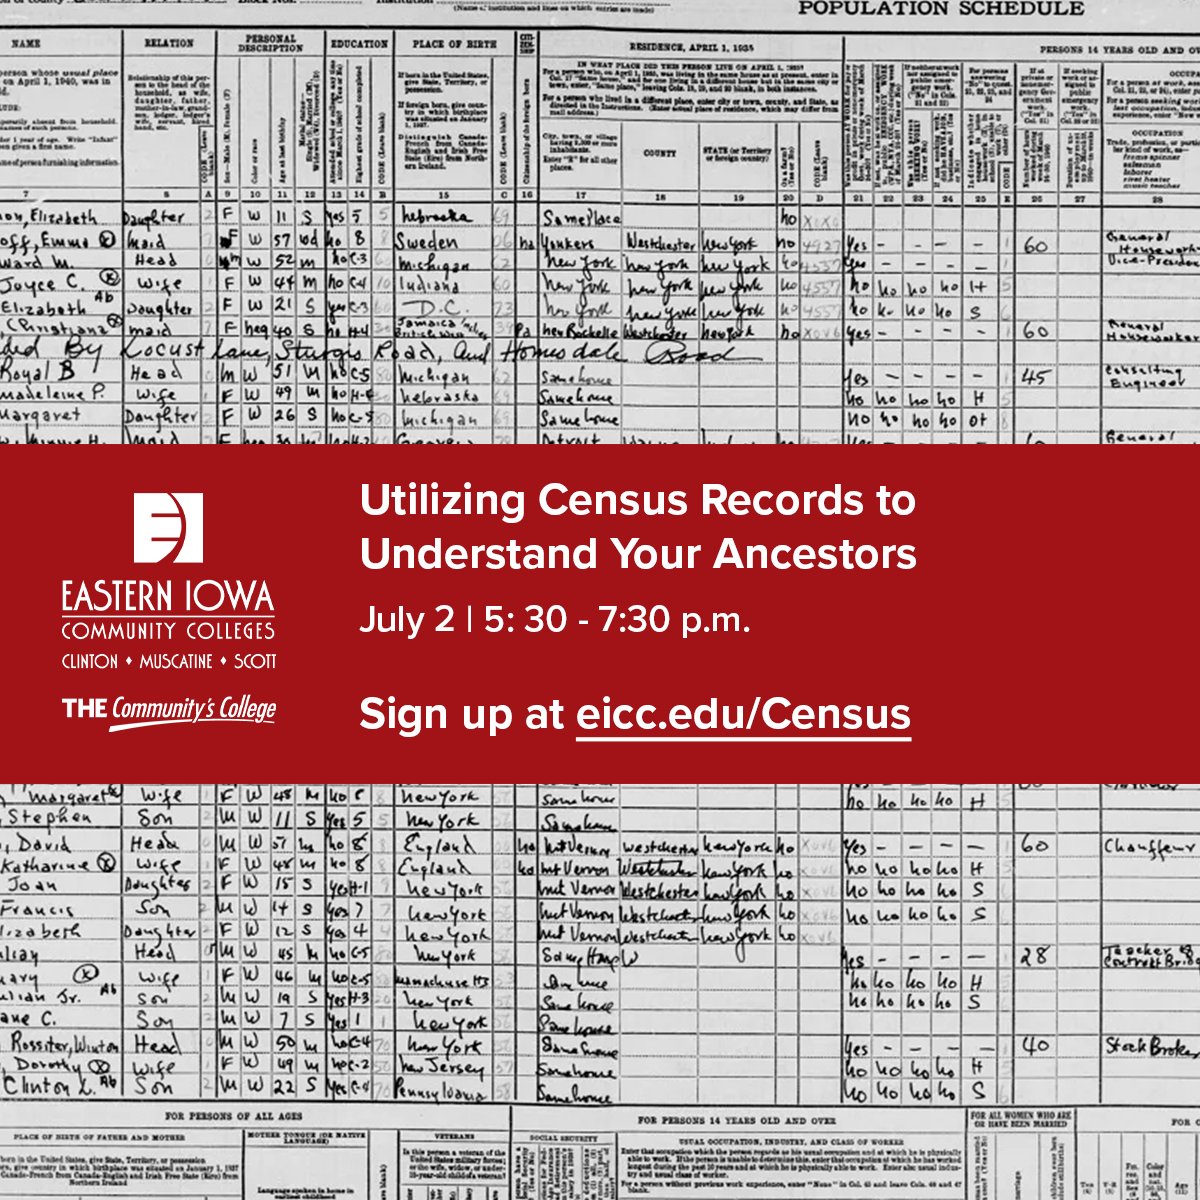 Learn where to find and how to use census records to build your family.

Sign up now at eicc.edu/Census.

#THECommunitysCollege #Genealogy